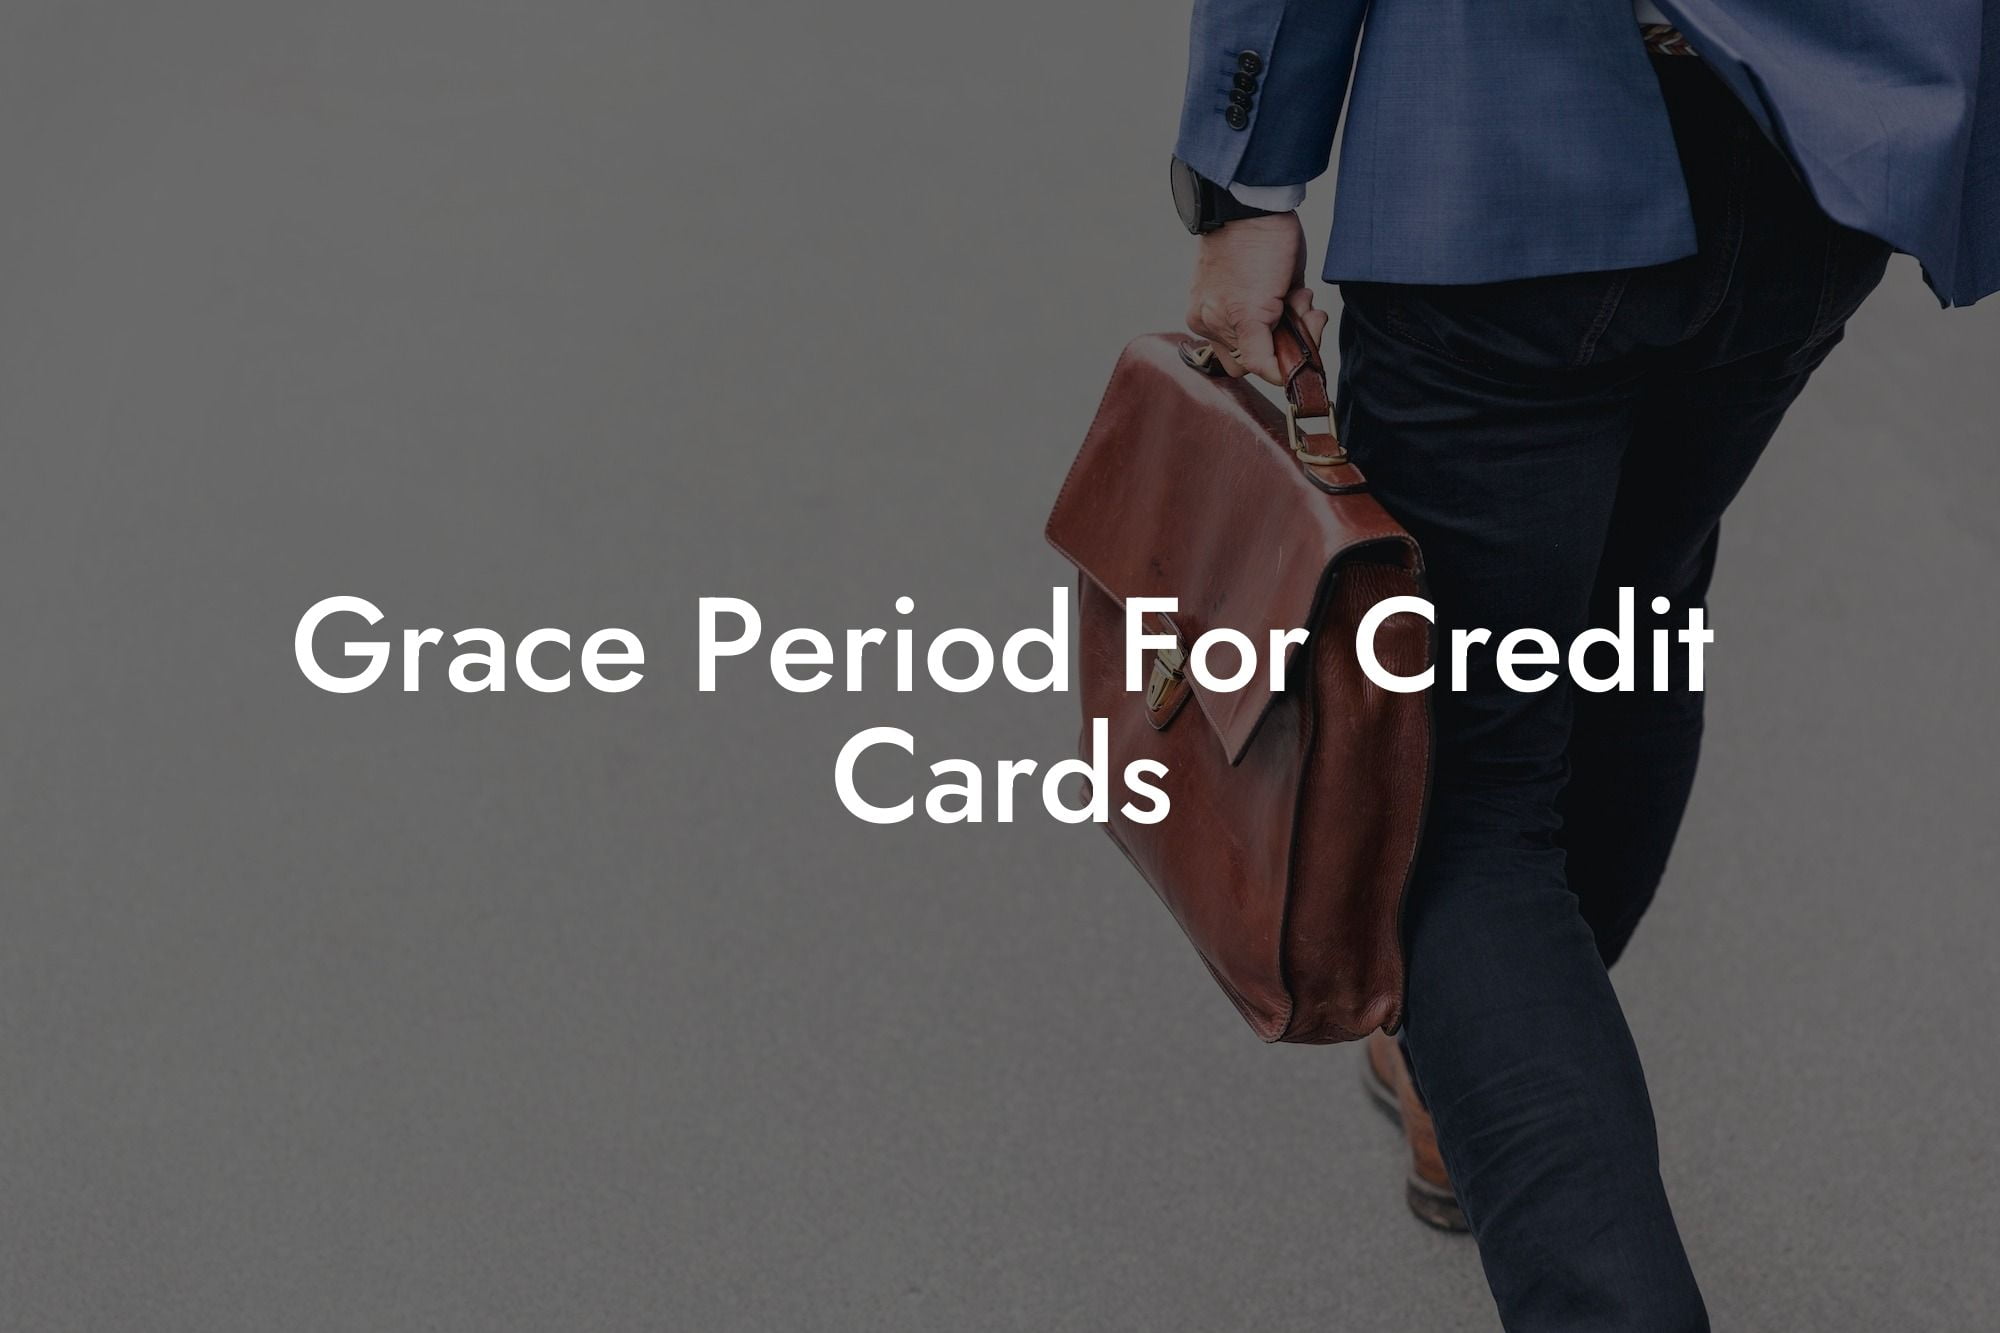 Grace Period For Credit Cards